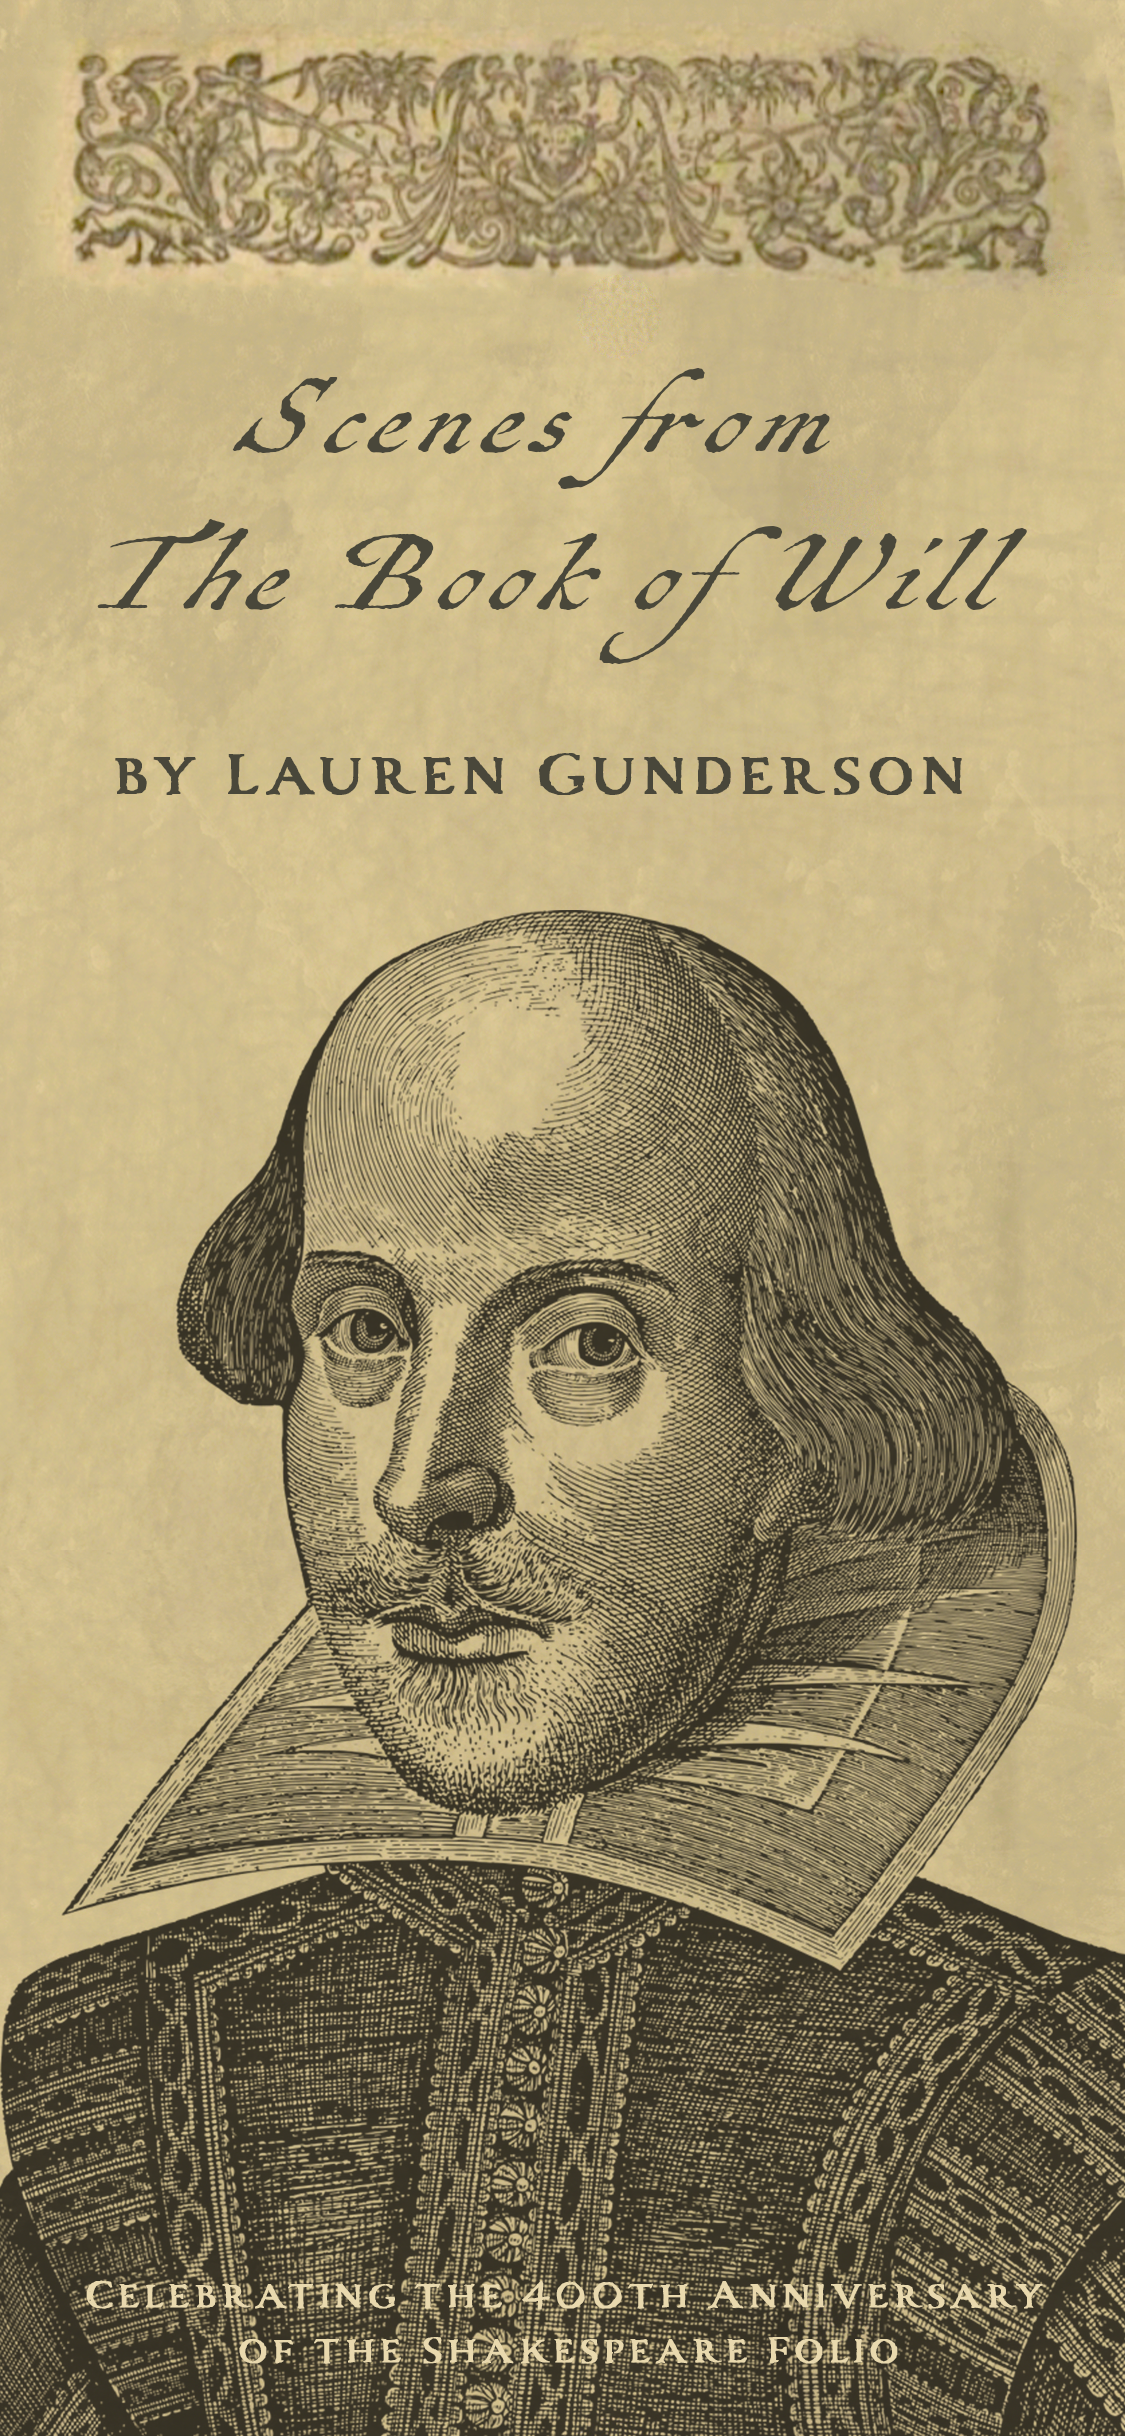 Cover page of program for Scenes from The Book of Will by Lauren Gunderson